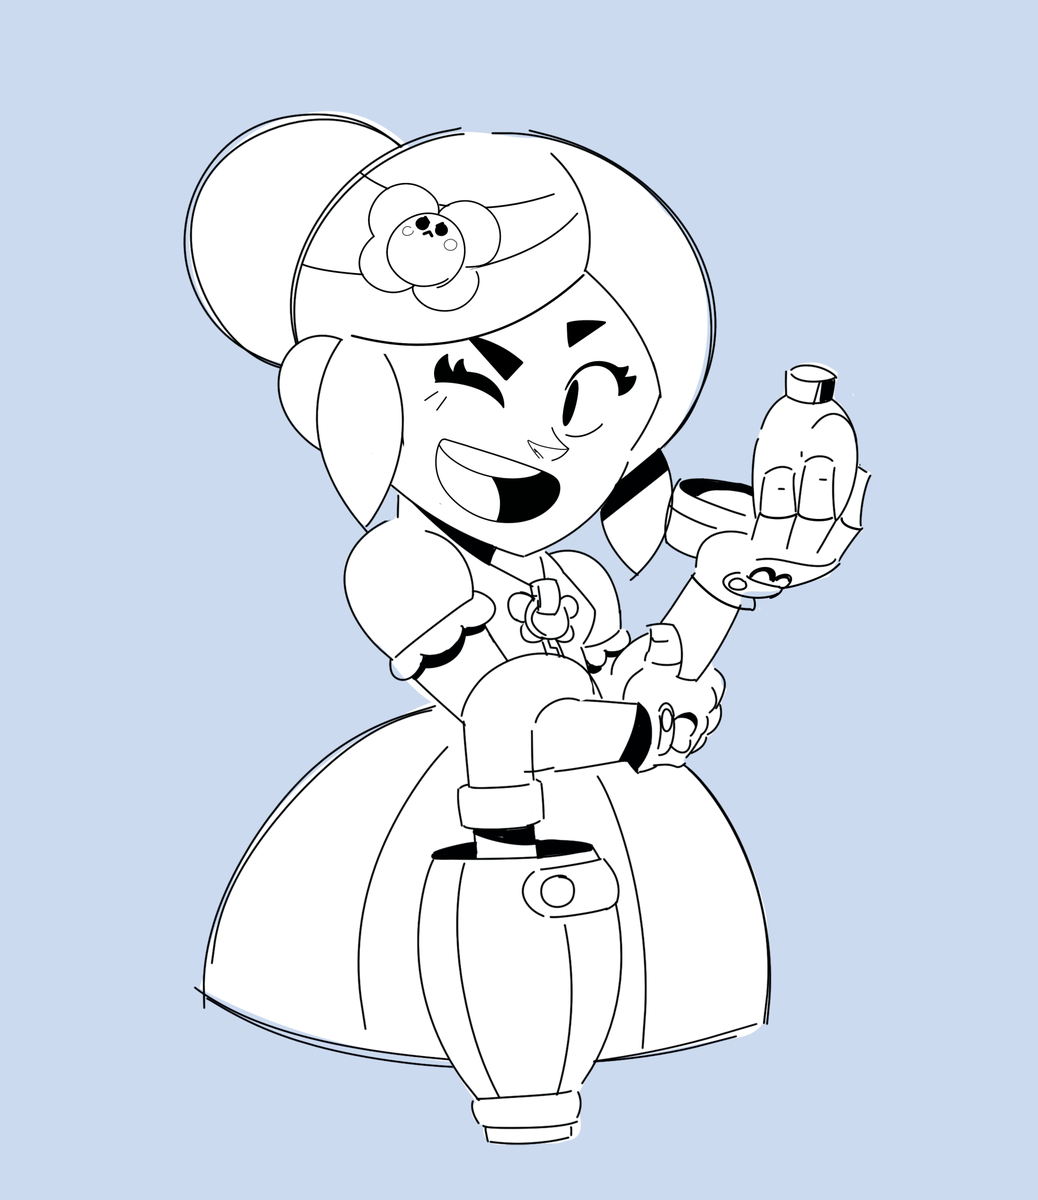 Paul On Twitter With The Release Of Piper S Awesome Animation I Thought I Would Post The Concepts For Her Redesign From A While Back Think I Forgot To Post Them Due A - brawl stars piper png